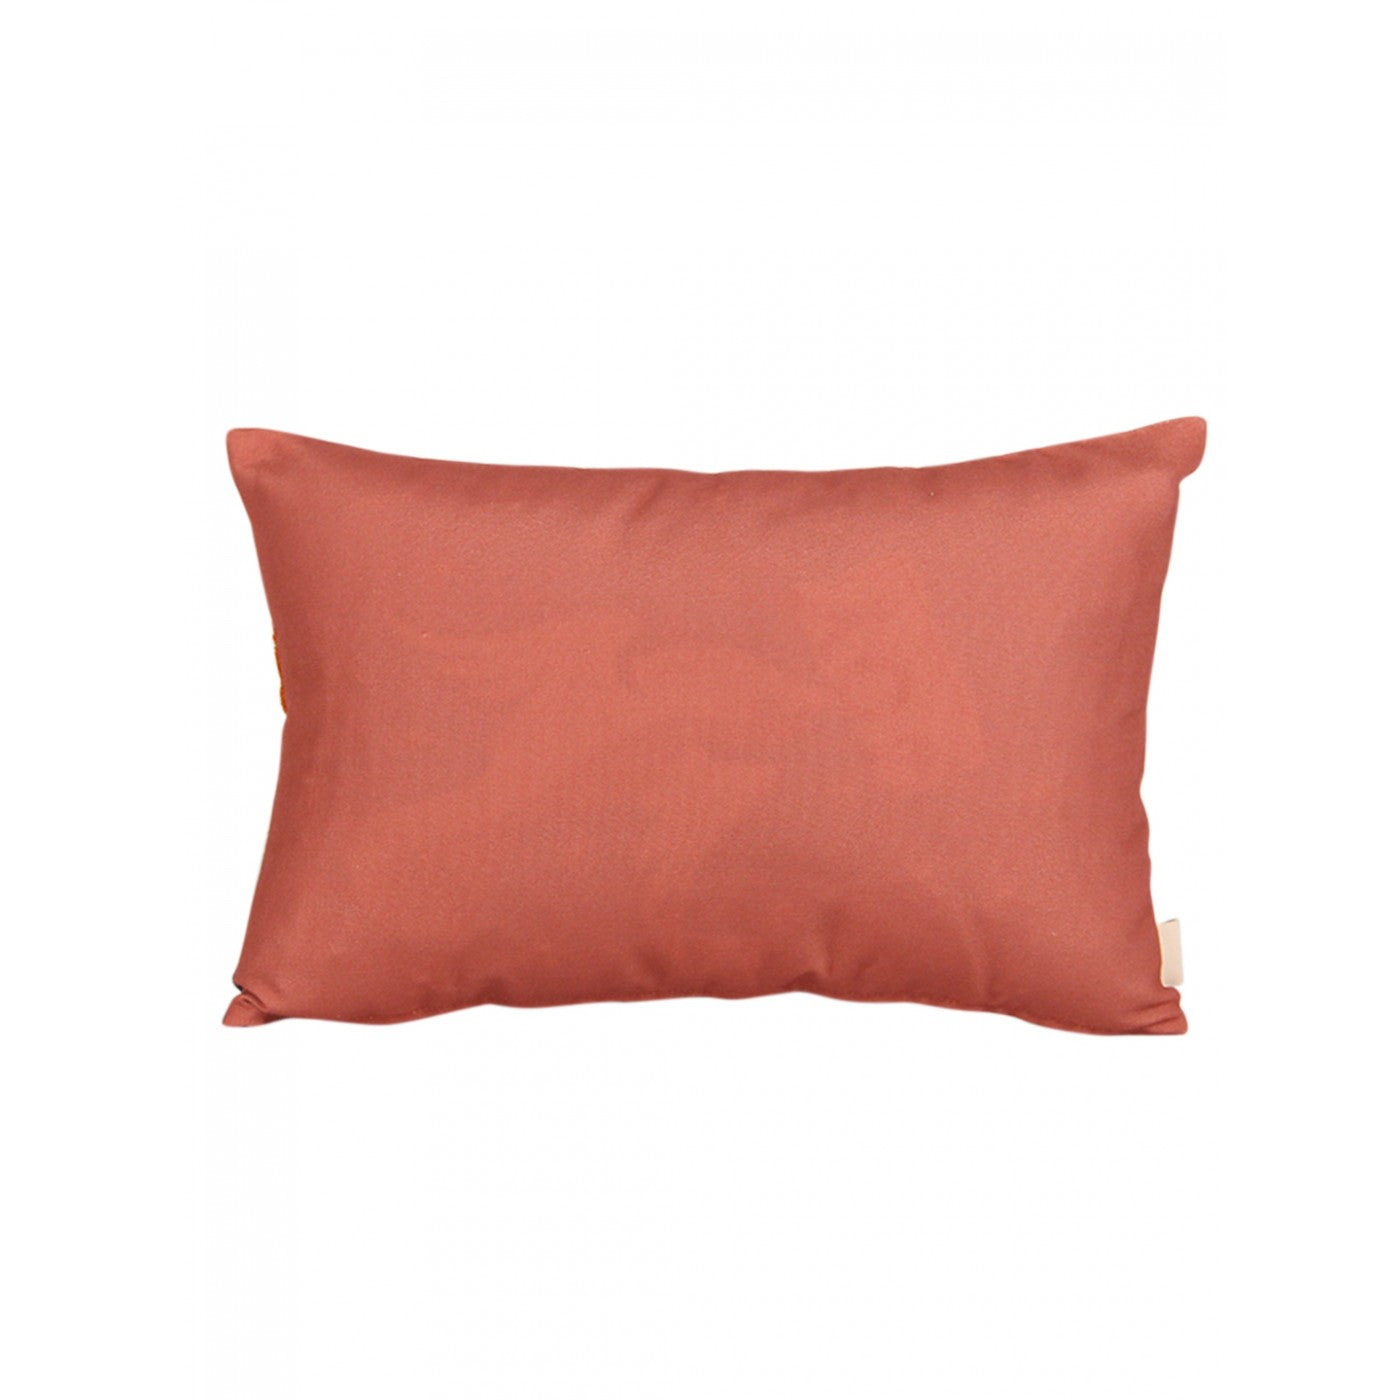 Chromatic Craftsmanship: 12x18 Inch Multi-Coloured Printed & Embroidered Cushion Cover